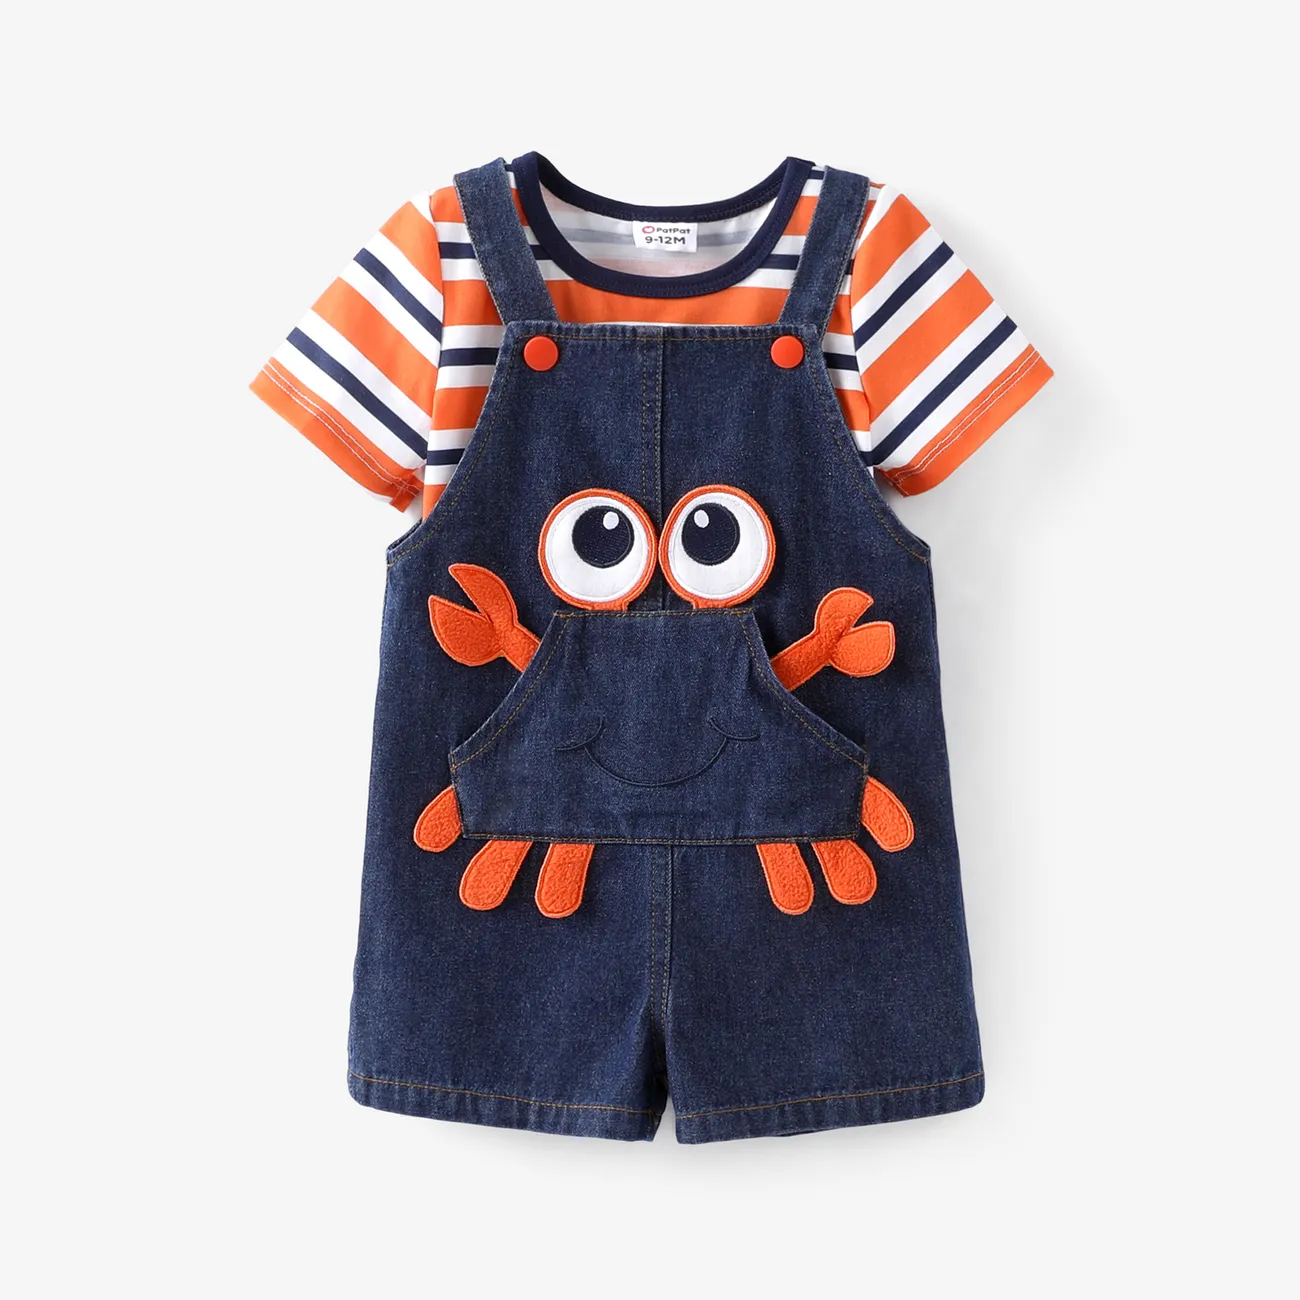 Baby Boy 2pcs Striped Tee and Crab Embroidery Overalls Set Orange big image 1